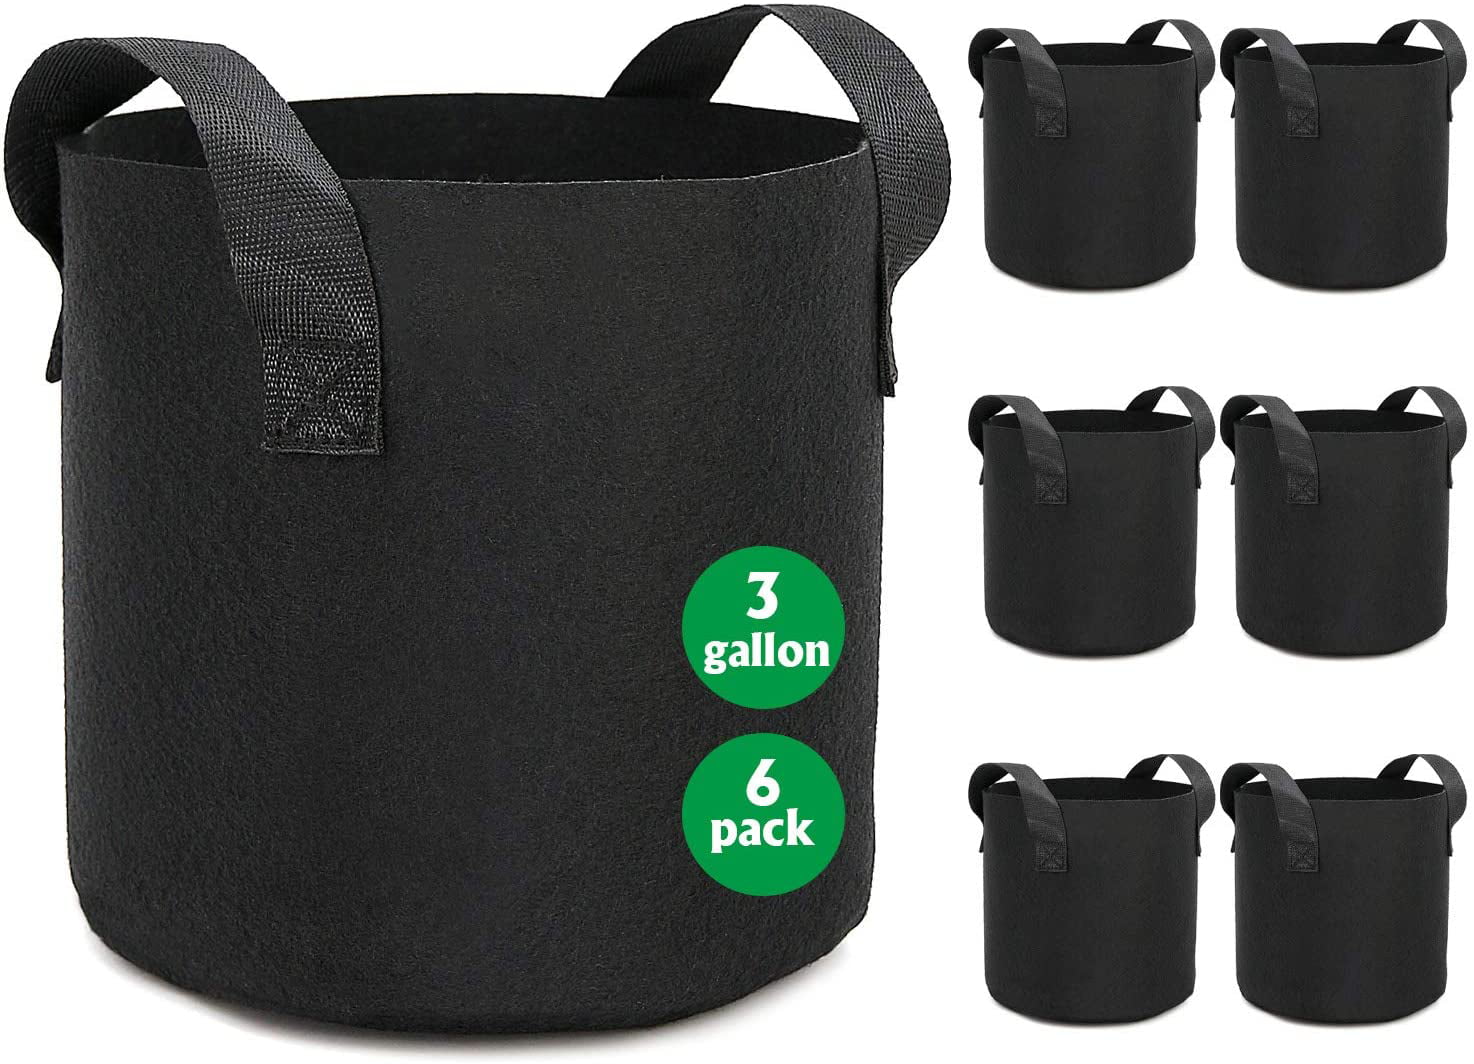 6 Pack Grow Bags Garden Heavy Duty Non-Woven Aeration Plant Fabric Pot Container 